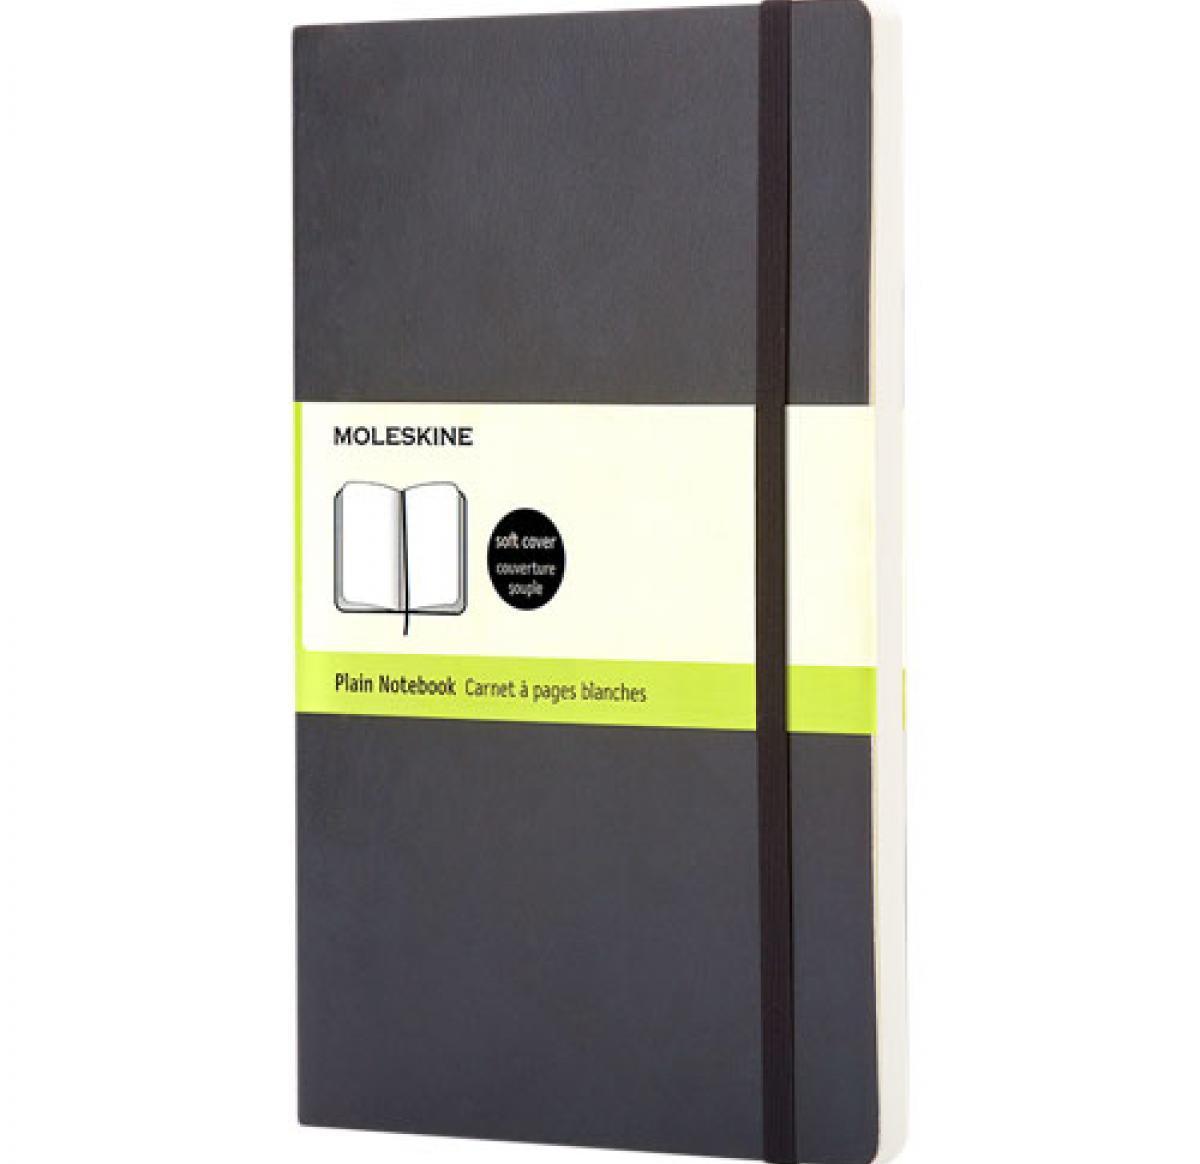 Moleskine Soft Cover Notebook Large - 192 Plain Pages